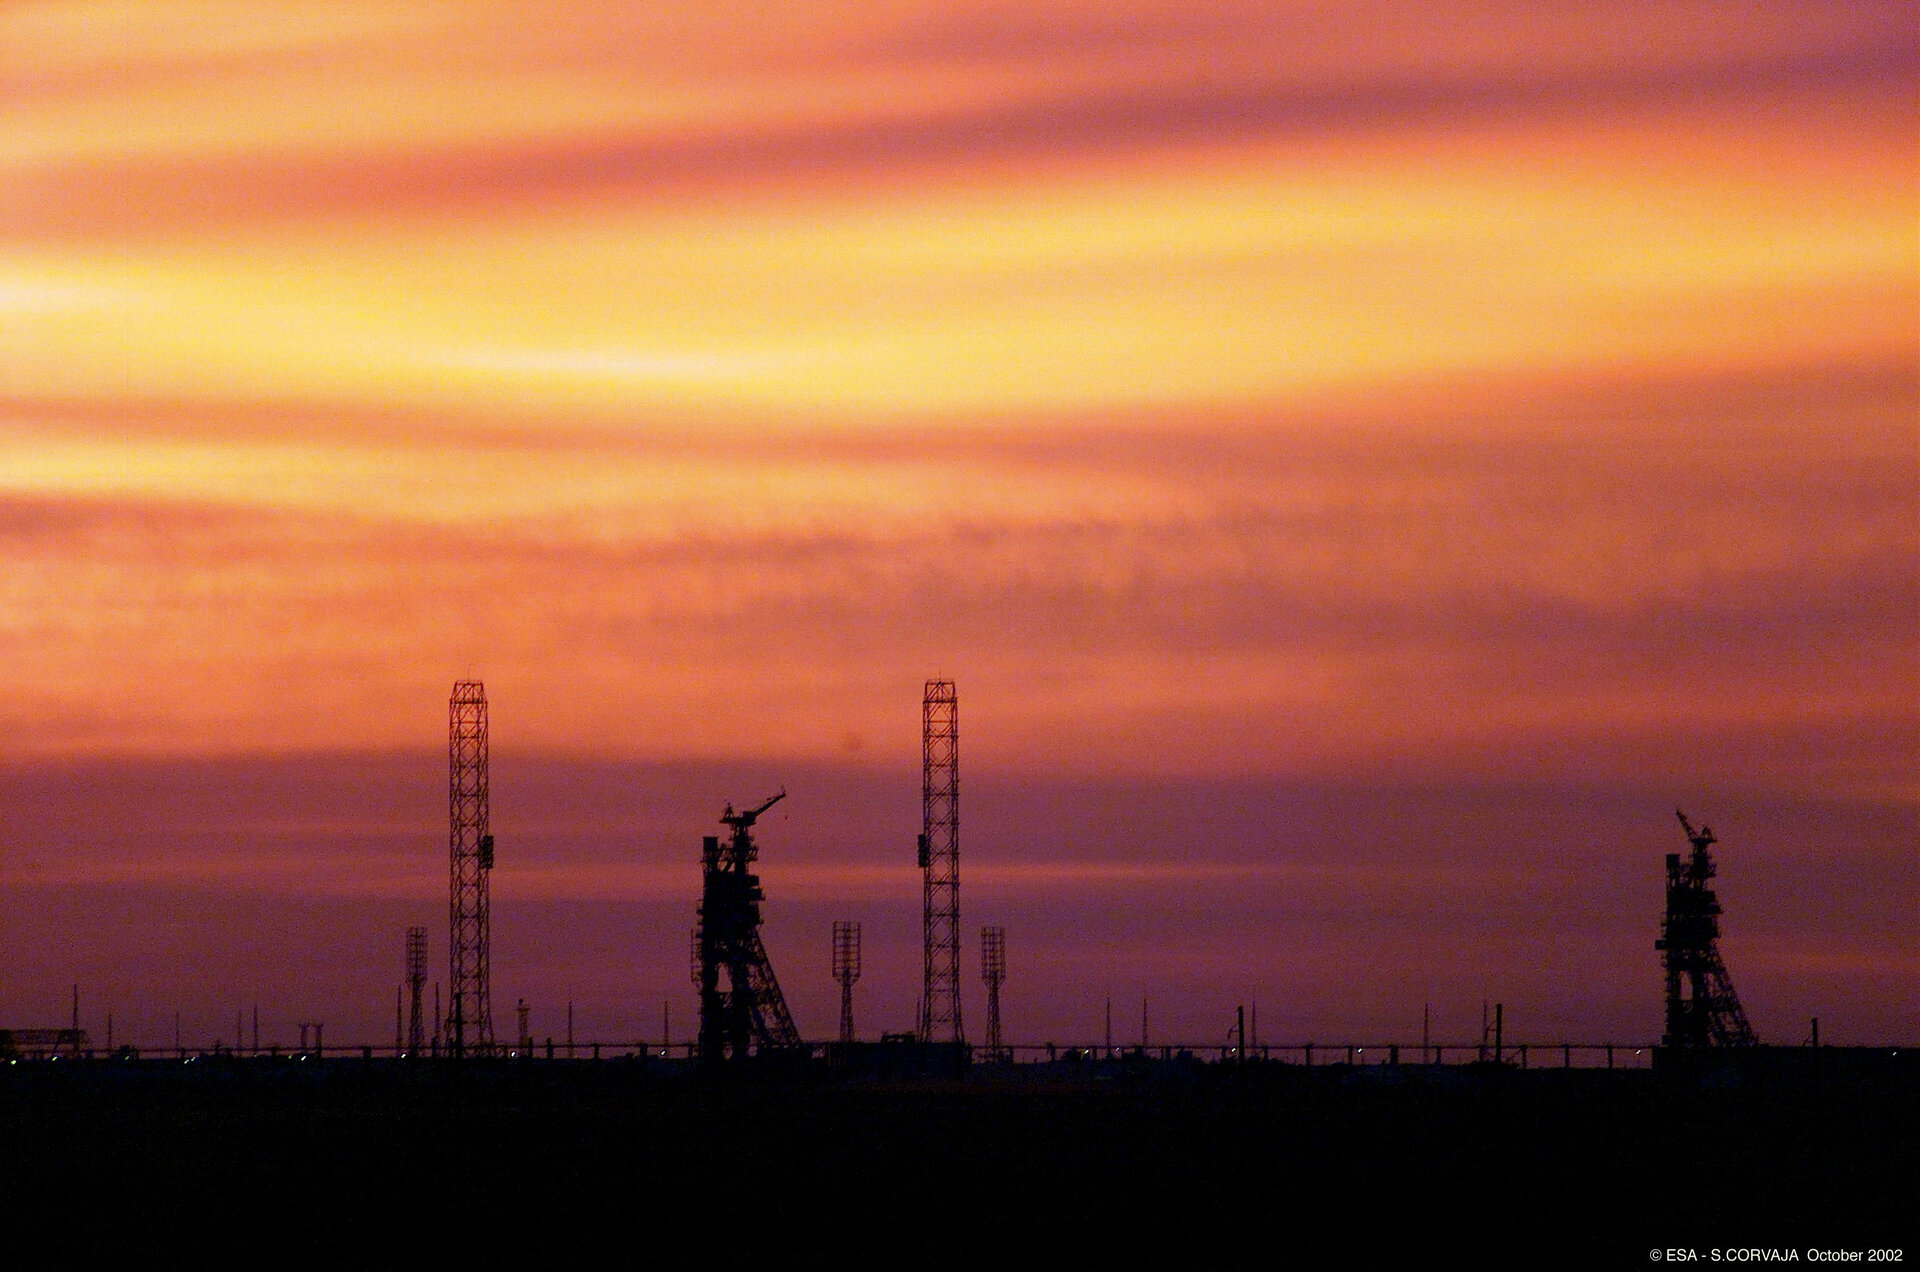 Sunset over the launch pad at Baikonur